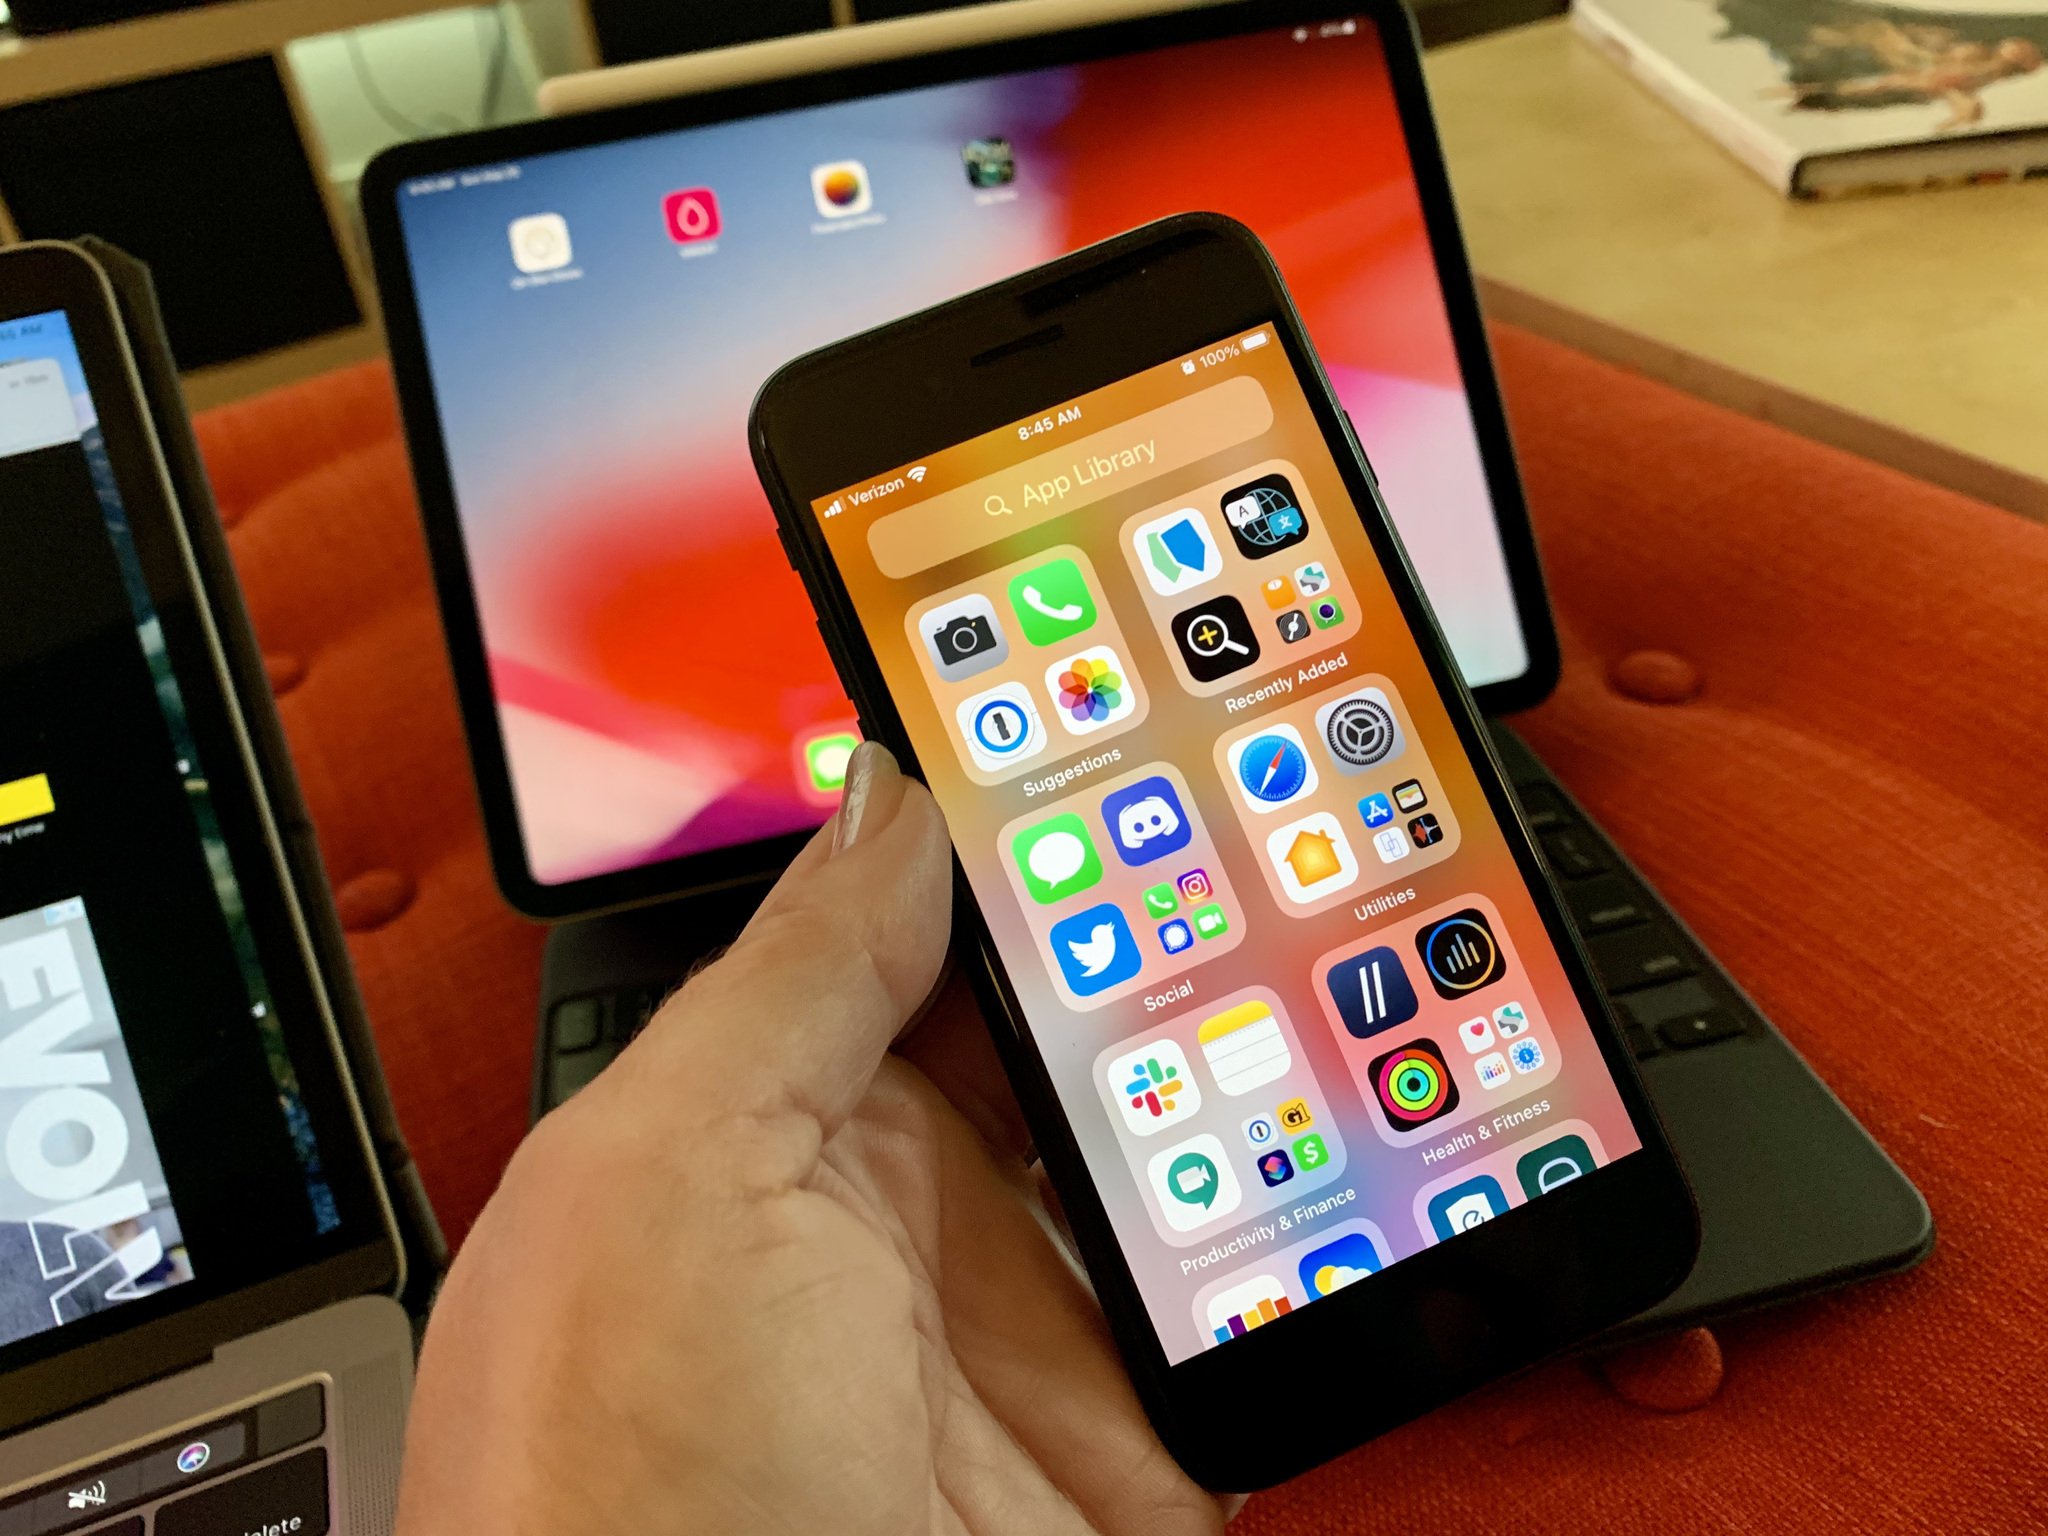 How to use App Library on your iPhone and iPad | iMore